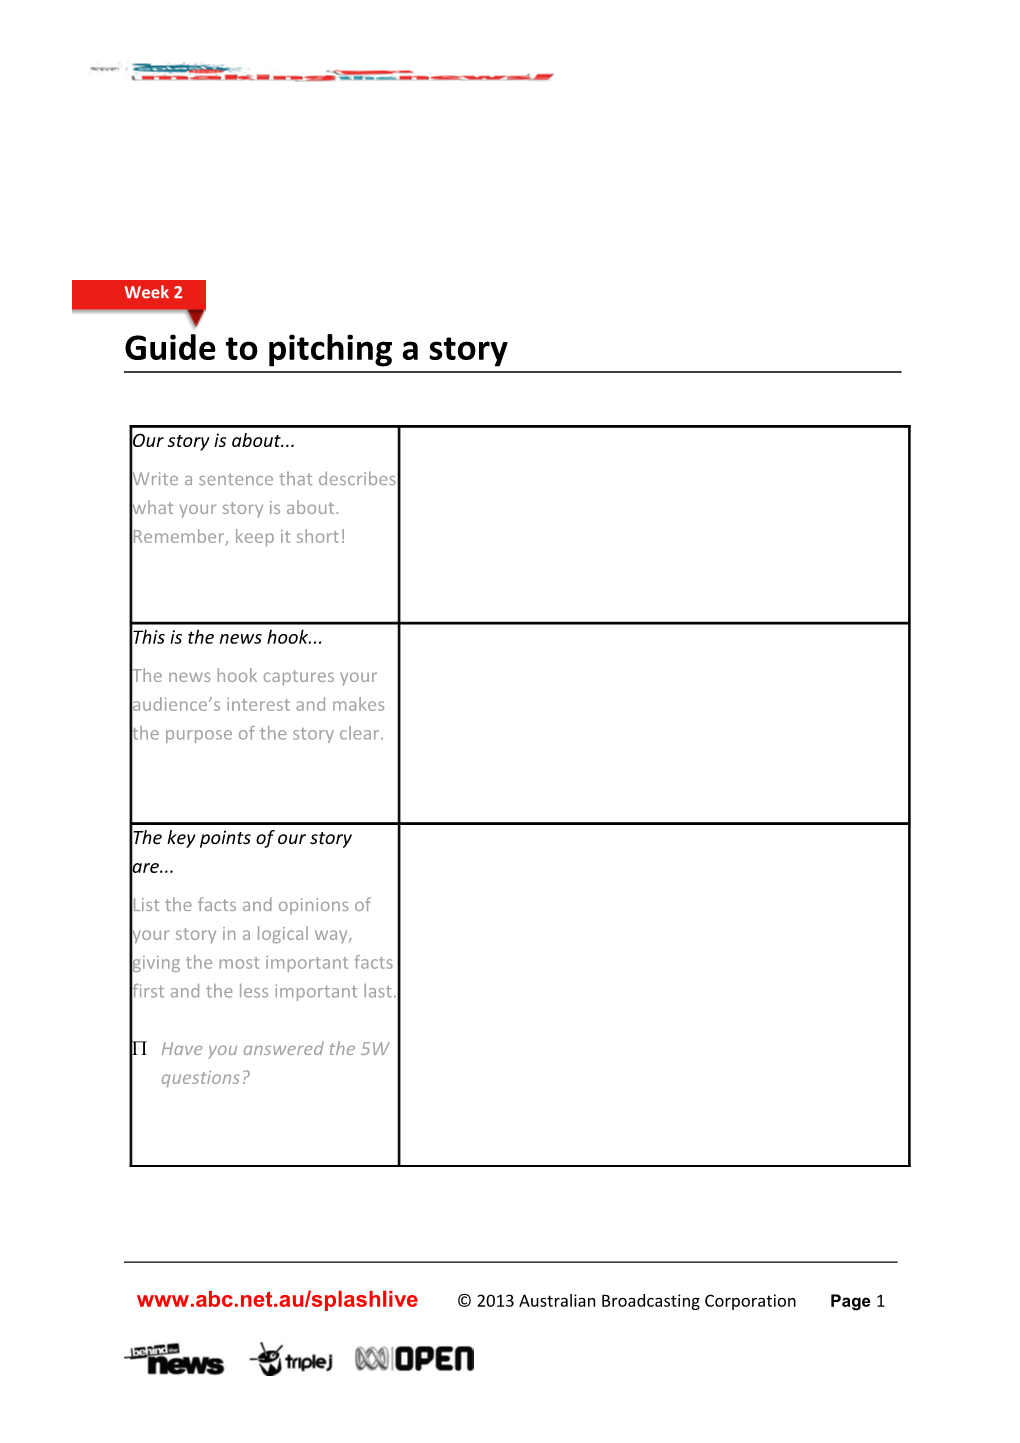 Guide to Pitching a Story